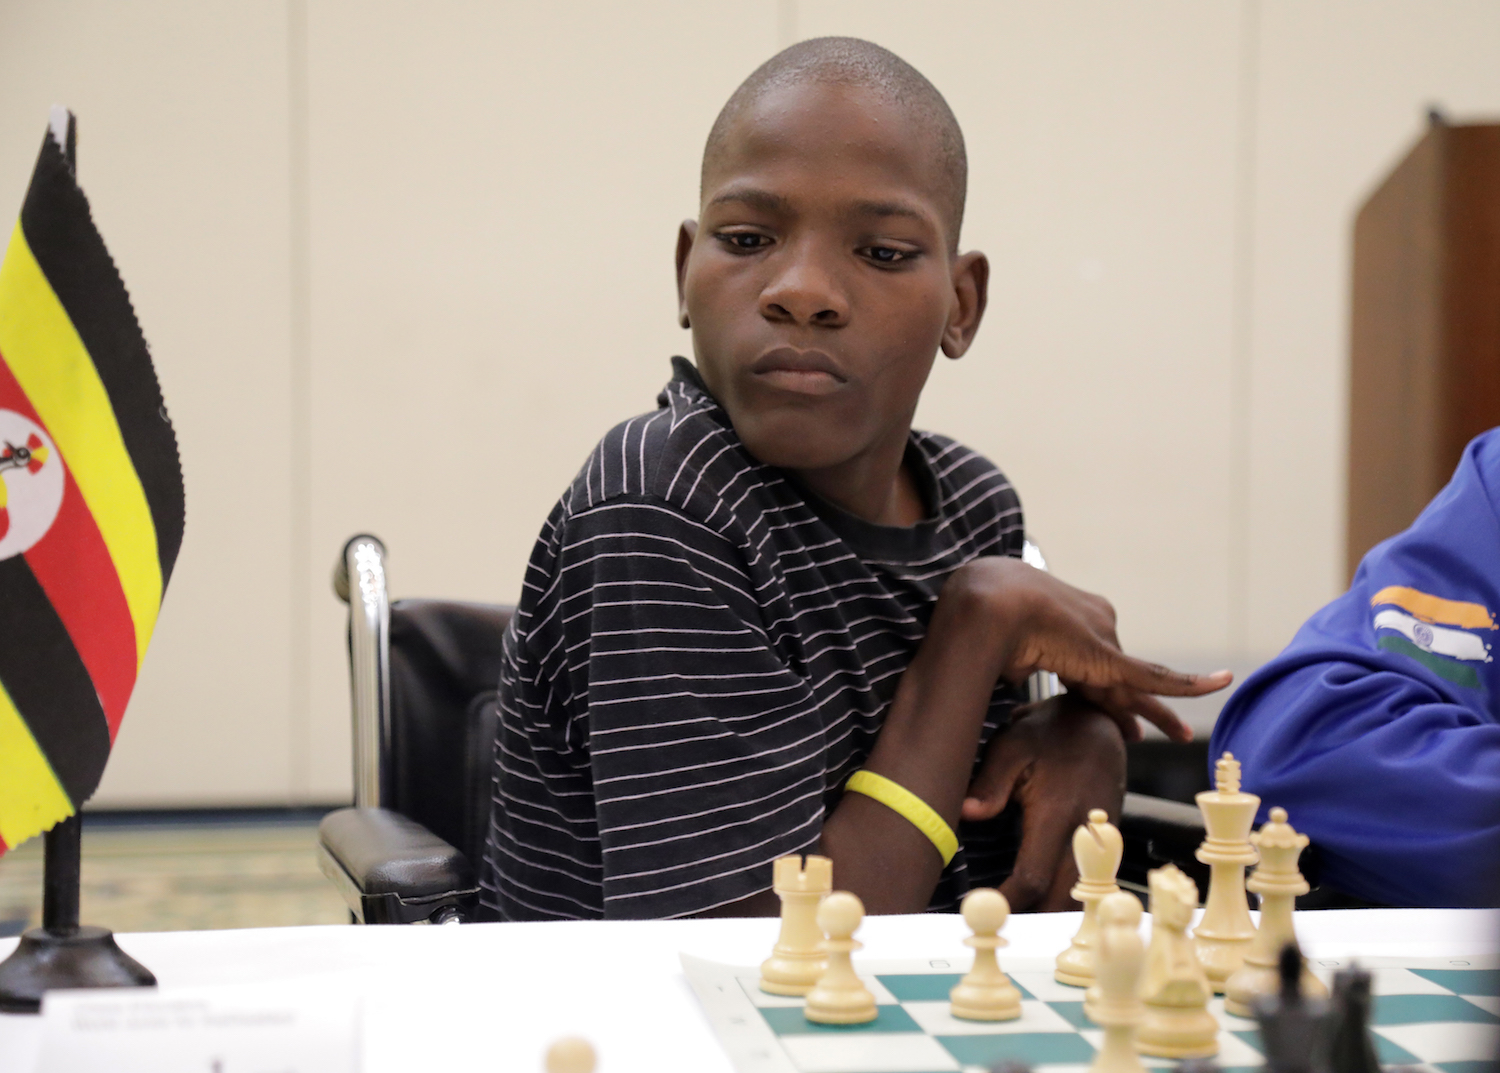 World Junior Chess – World Junior Chess Championship for the Disabled